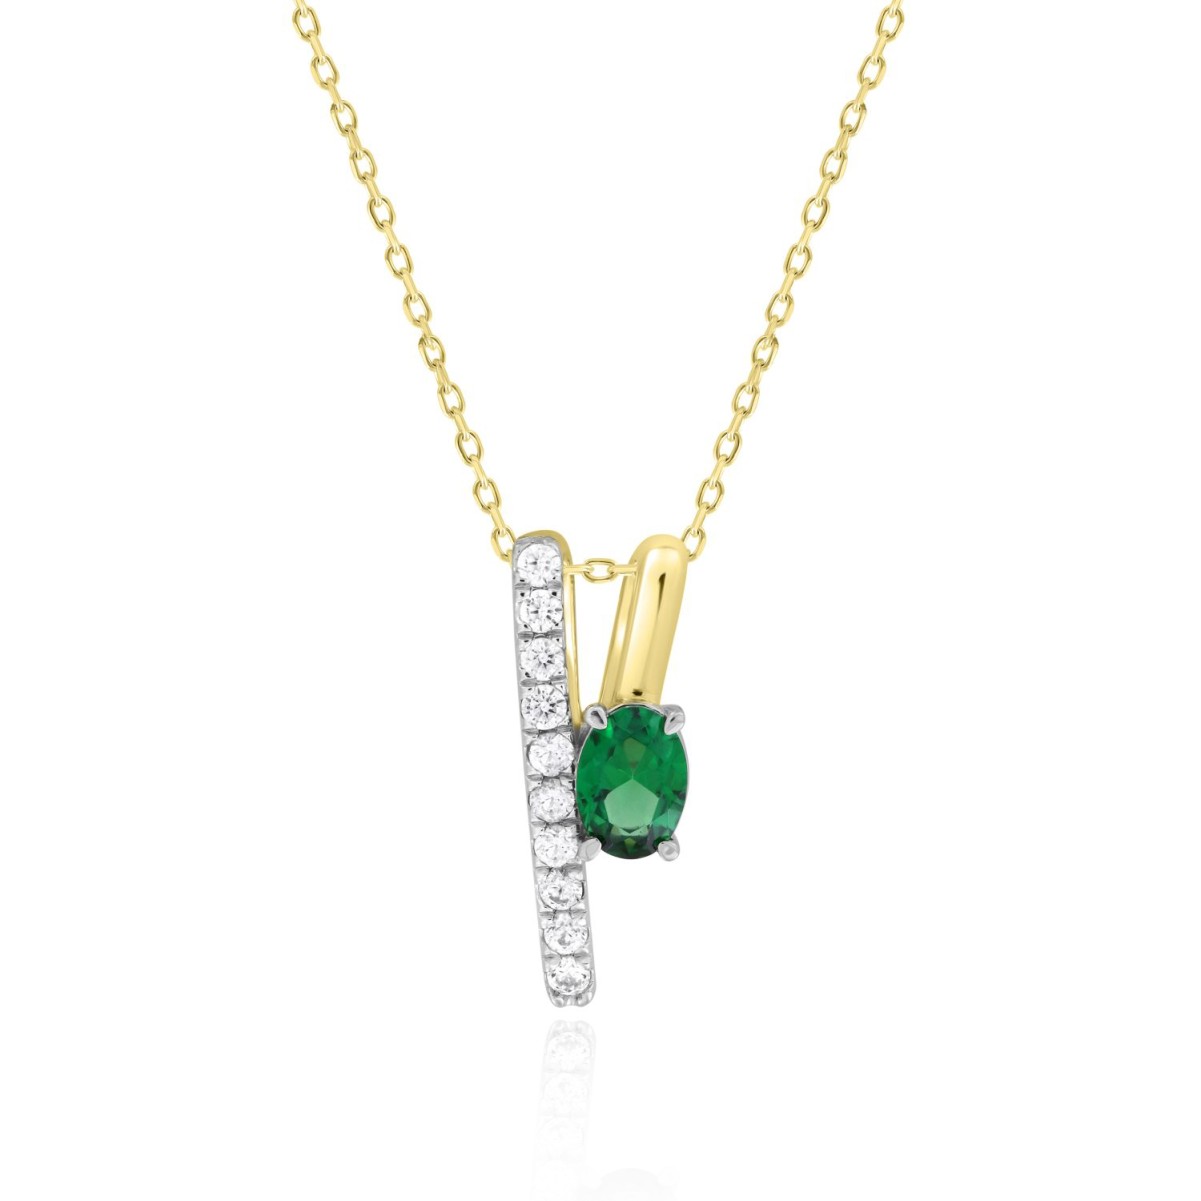 18K YELLOW GOLD 1 1/5CT ROUND/OVAL DIAMOND LADIES PENDANT WITH CHAIN(COLOR STONE OVAL GREEN EMERALD DIAMOND 7/8CT)